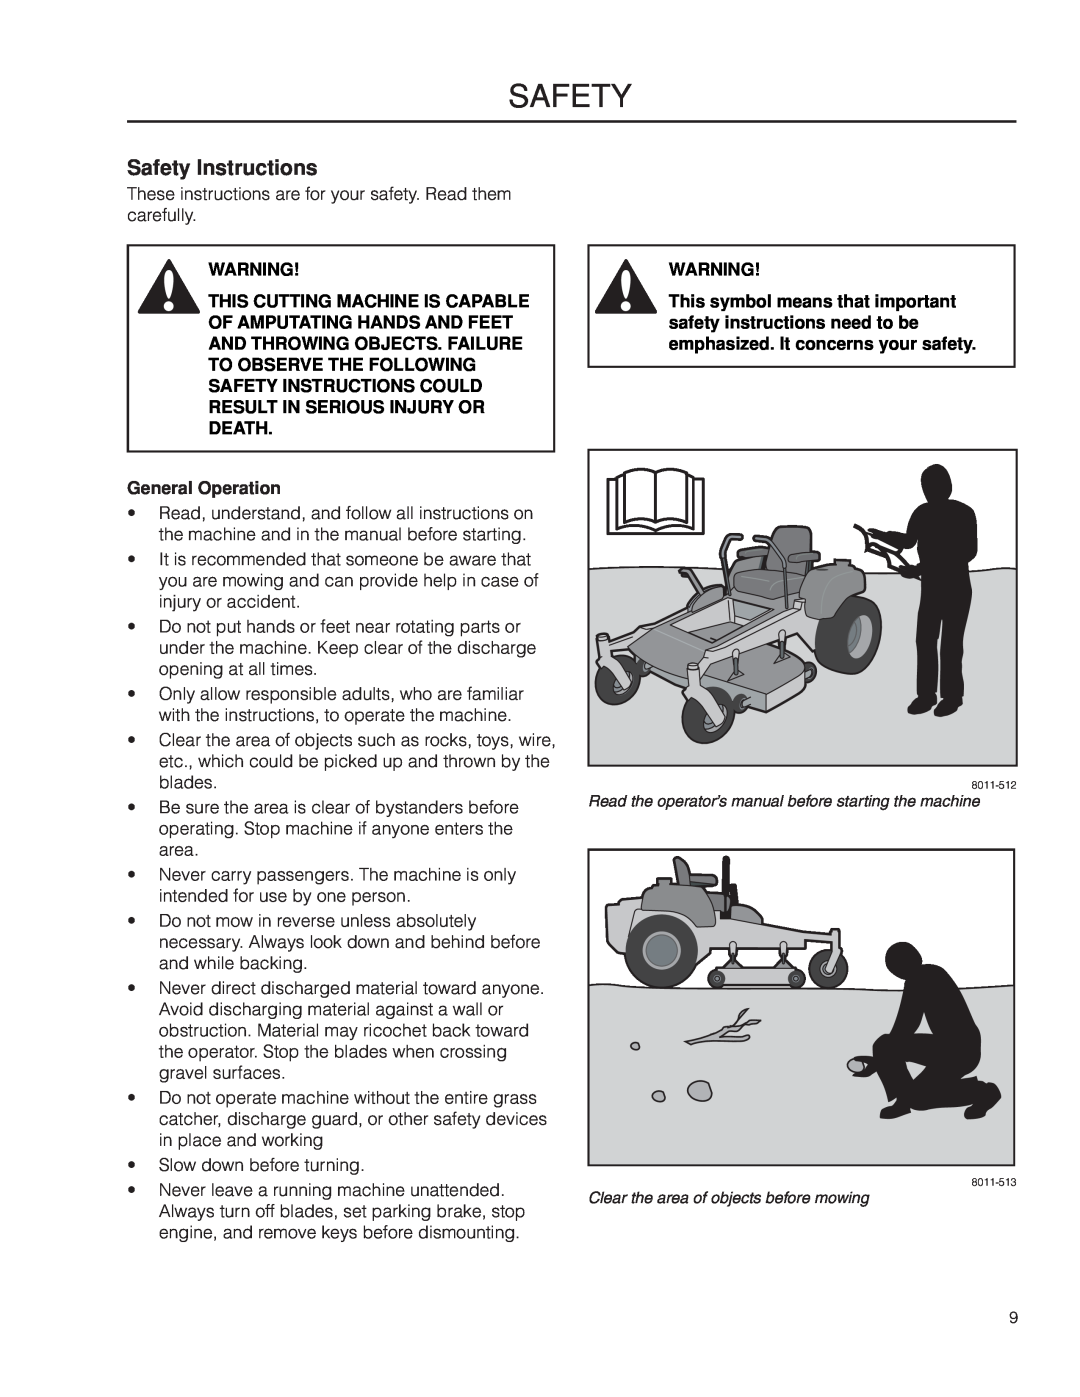 Husqvarna RZ4221 BF / 967176101 Safety Instructions, This Cutting Machine Is Capable Of Amputating Hands And Feet 